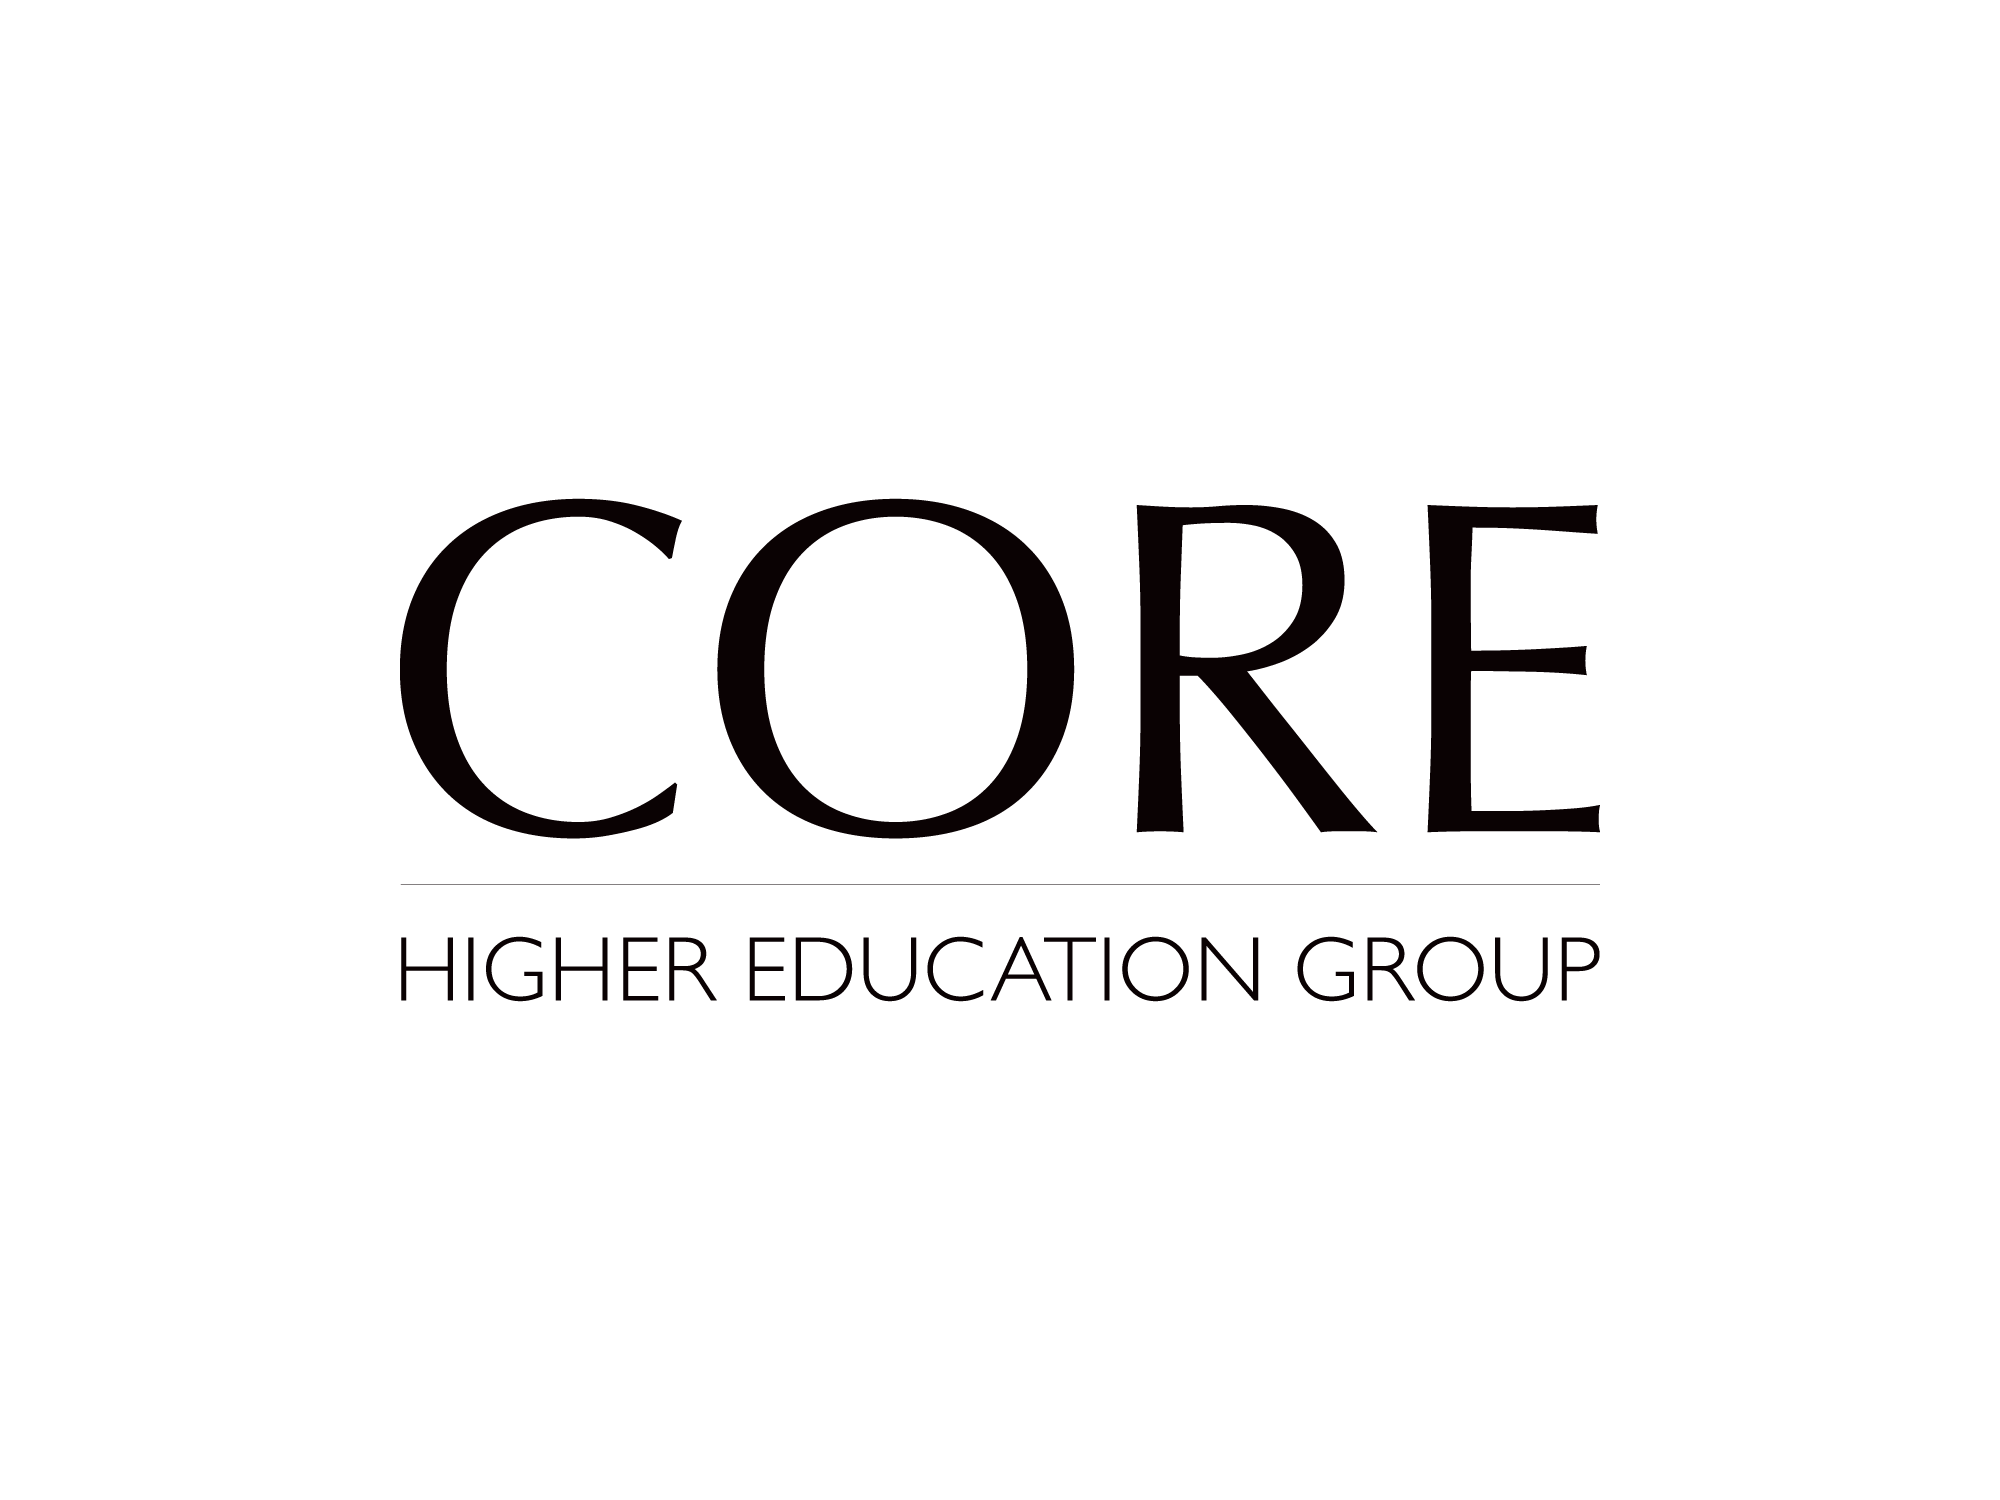 CORE Higher Education Group logo